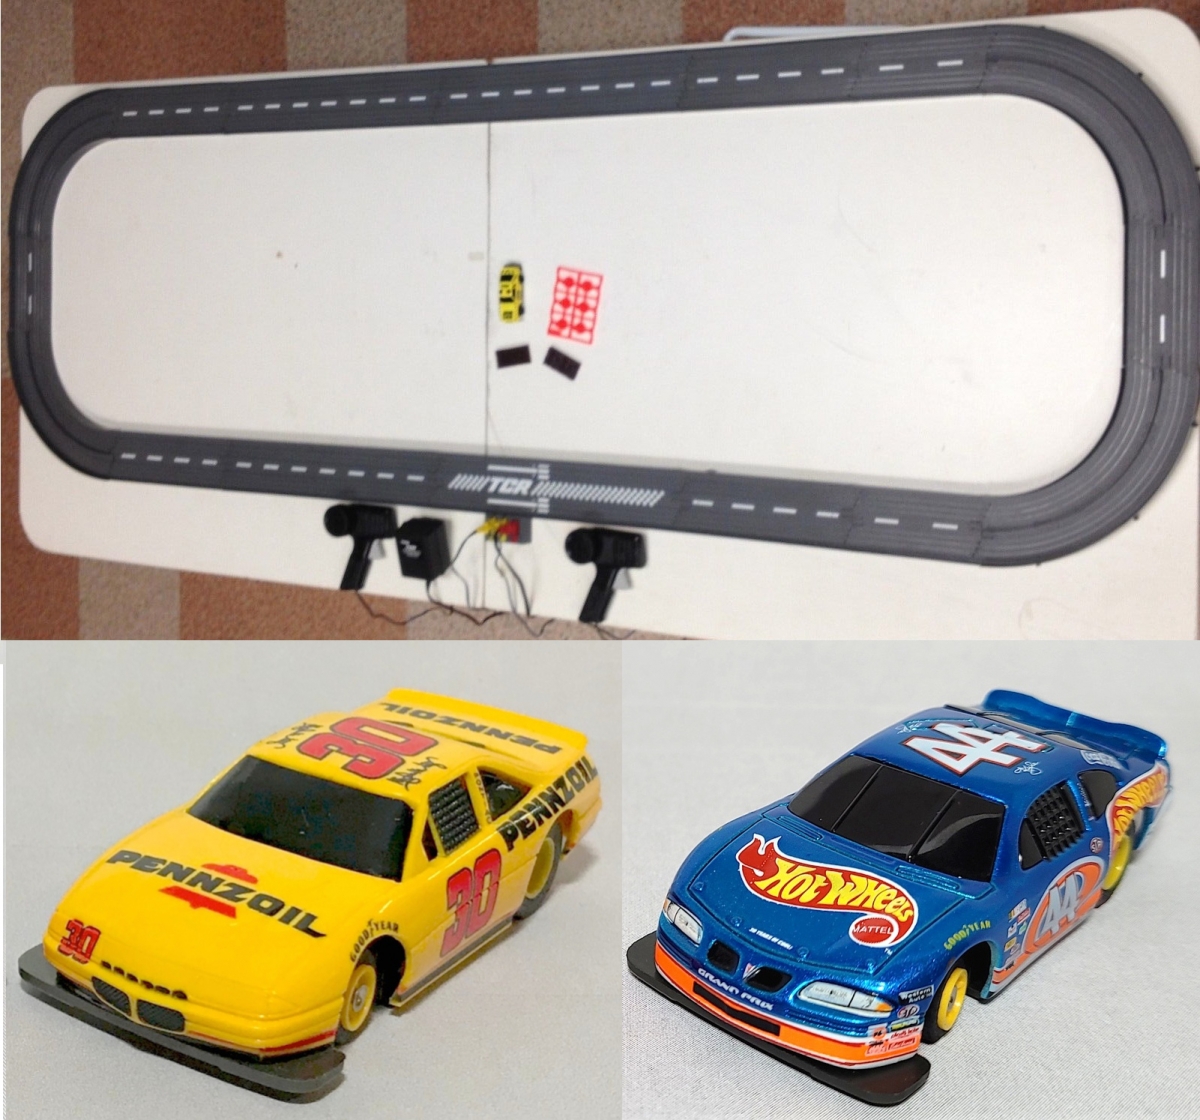 1980 Ideal TCR Rare Pick Up Truck Slot Car Body Unused 